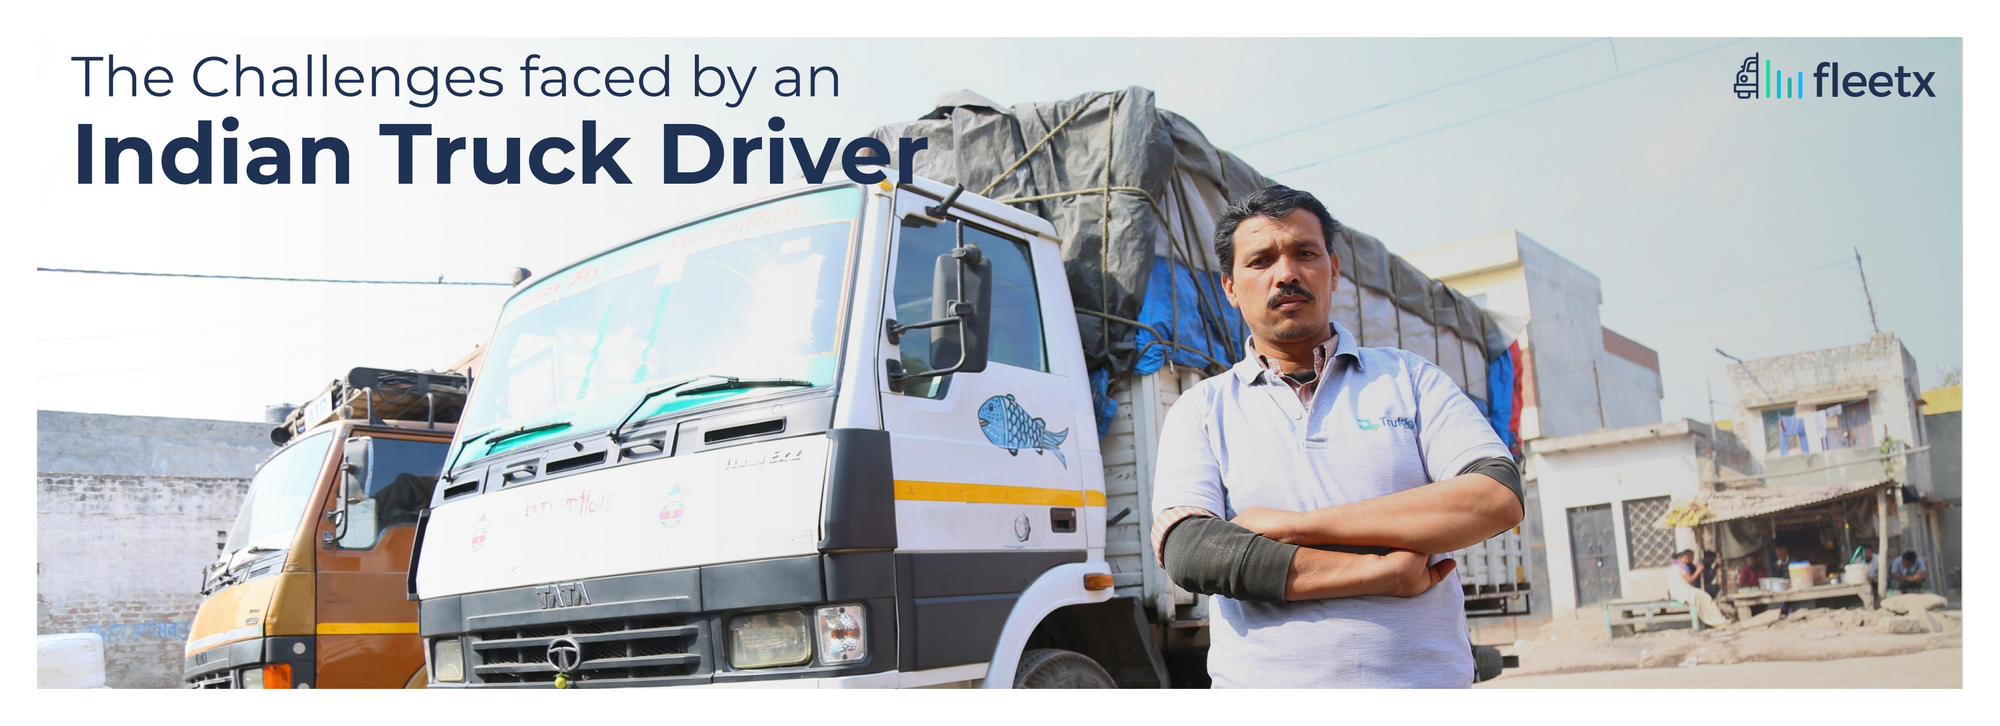 The Challenges faced by an Indian Truck Driver